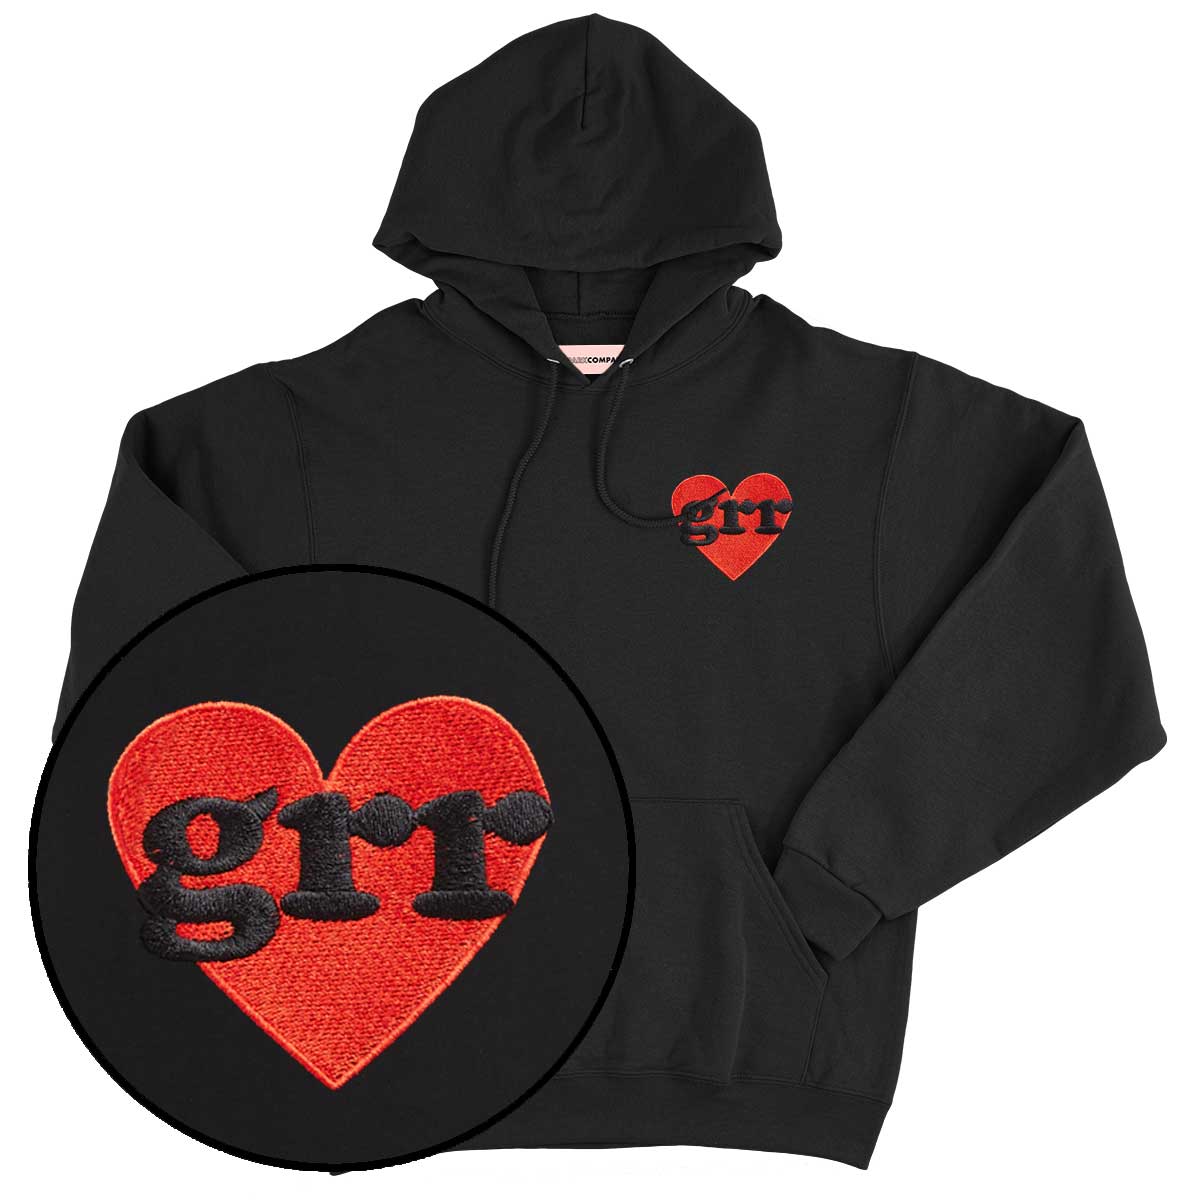 Grr Heart Embroidered Hoodie